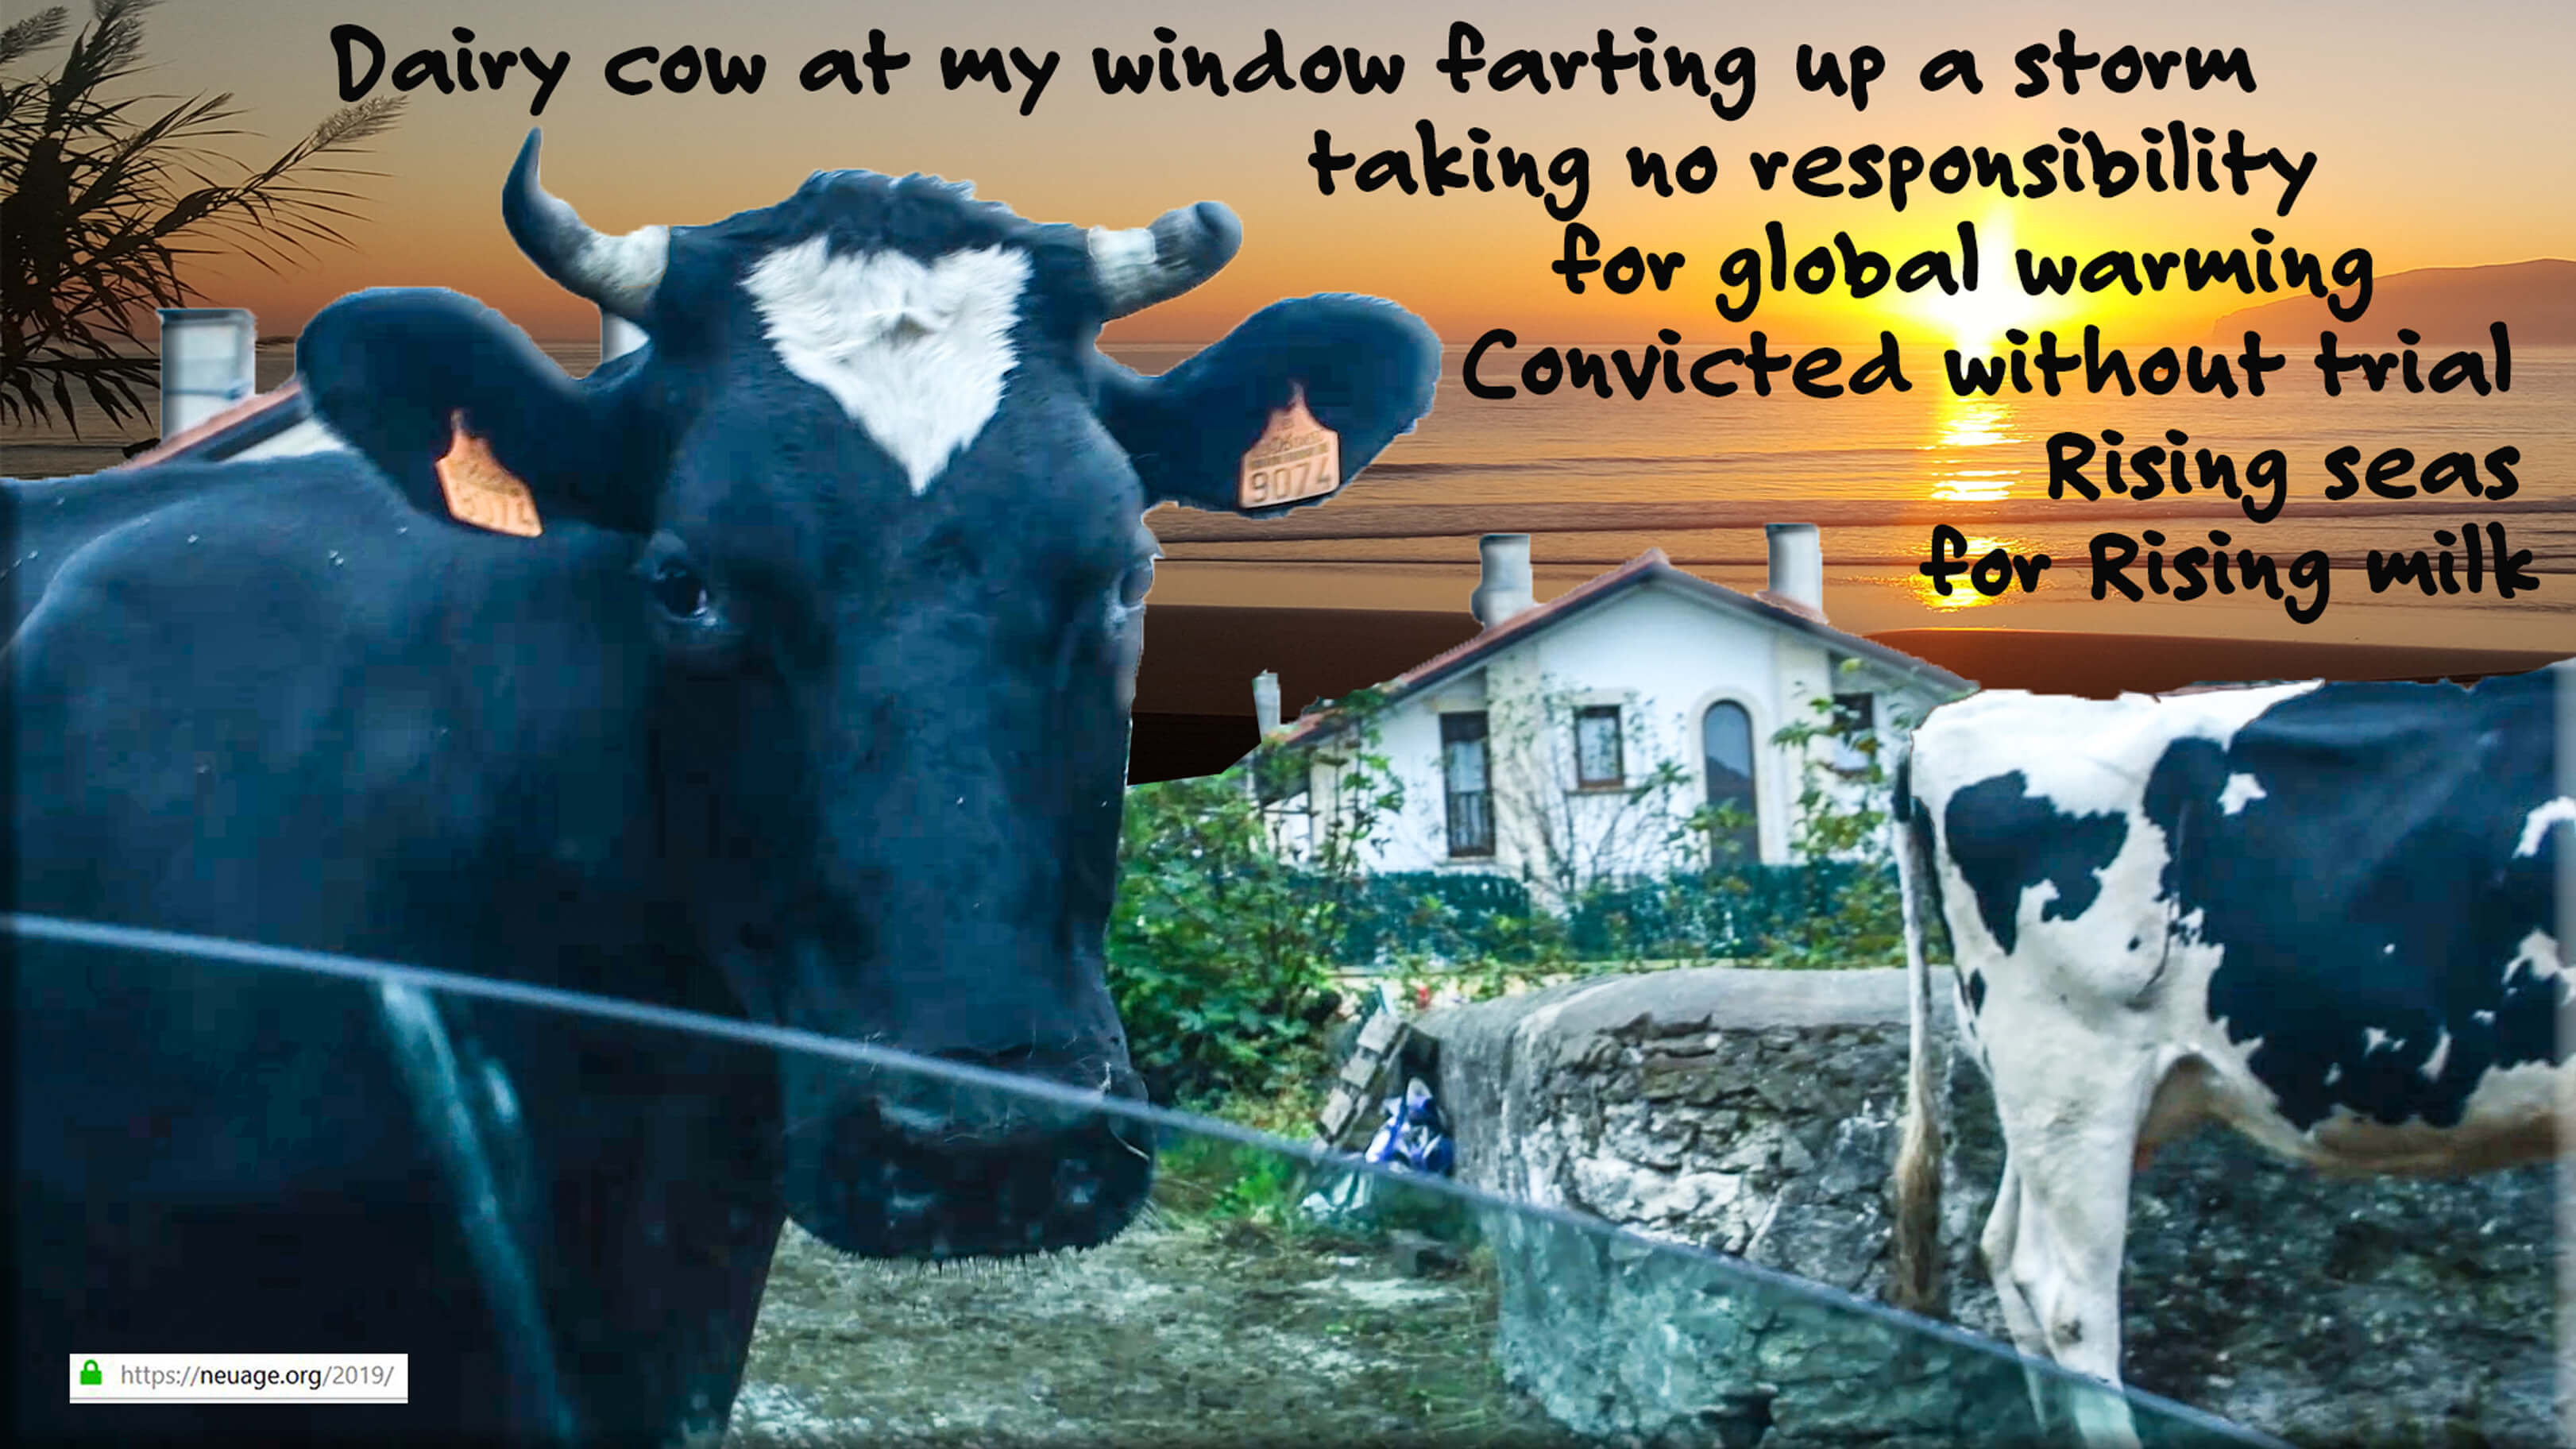 Dairy cow at my window 
farting up a storm 
taking no responsibility for global warming 
Convicted without trial
Rising seas for rising milk